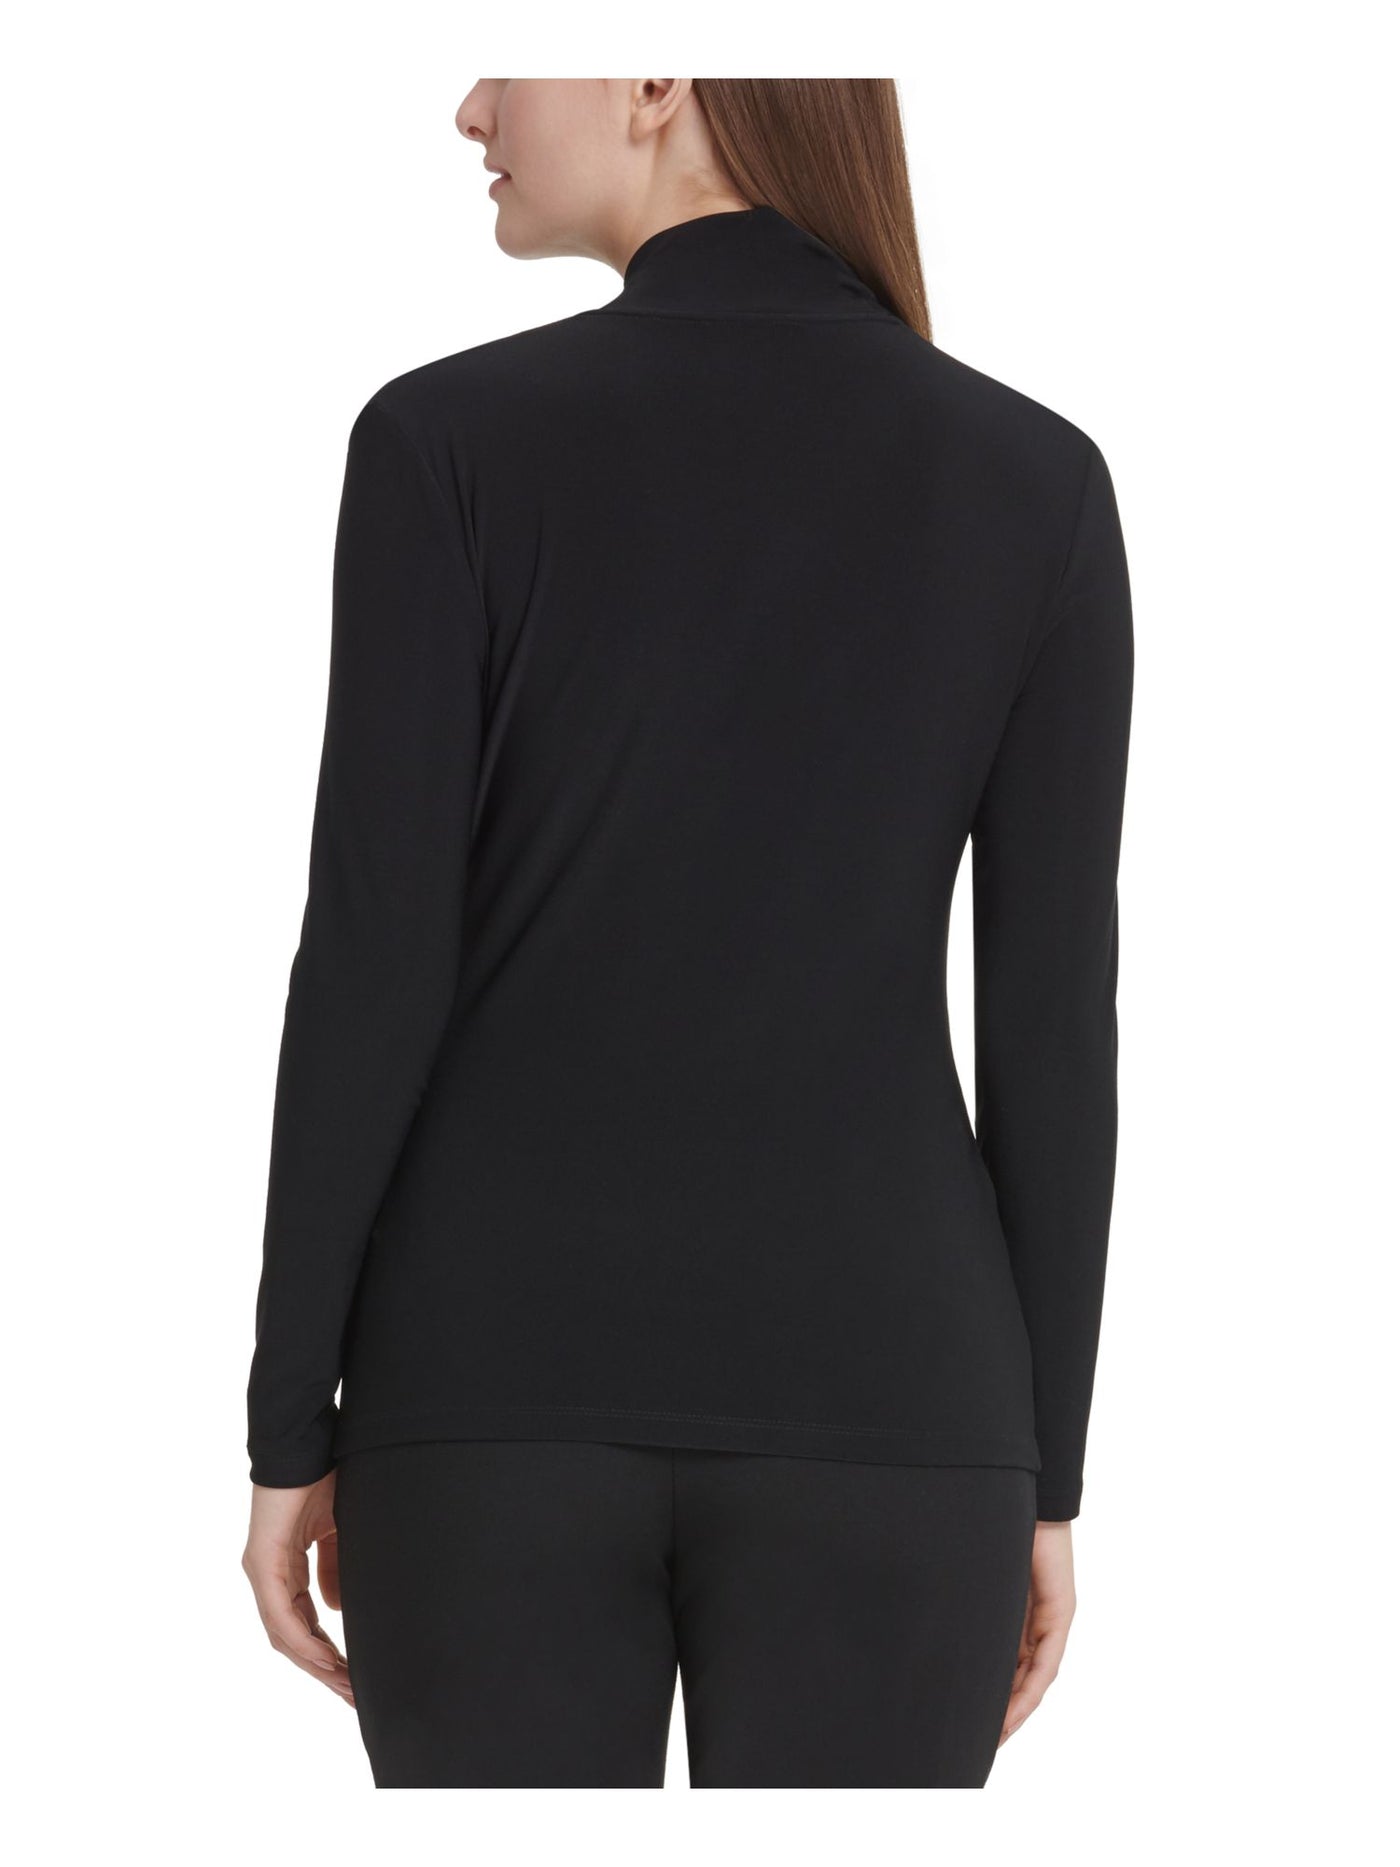 DKNY Womens Black Ruched Pullover Long Sleeve Surplice Neckline Top Petites PS